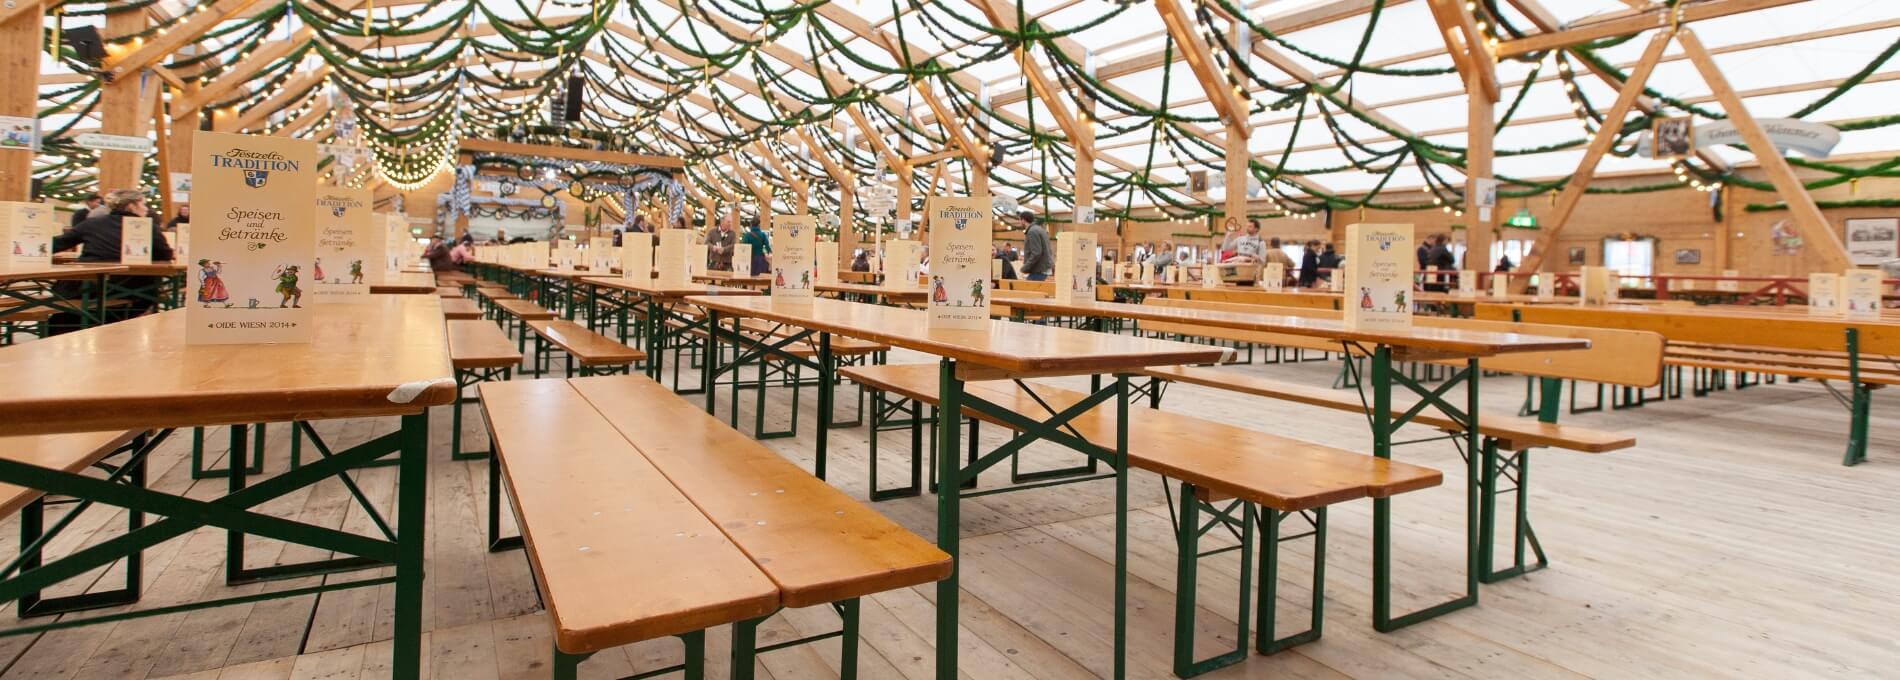 Many tables and benches of the beer garden table set under a marquee at Oktoberfest.